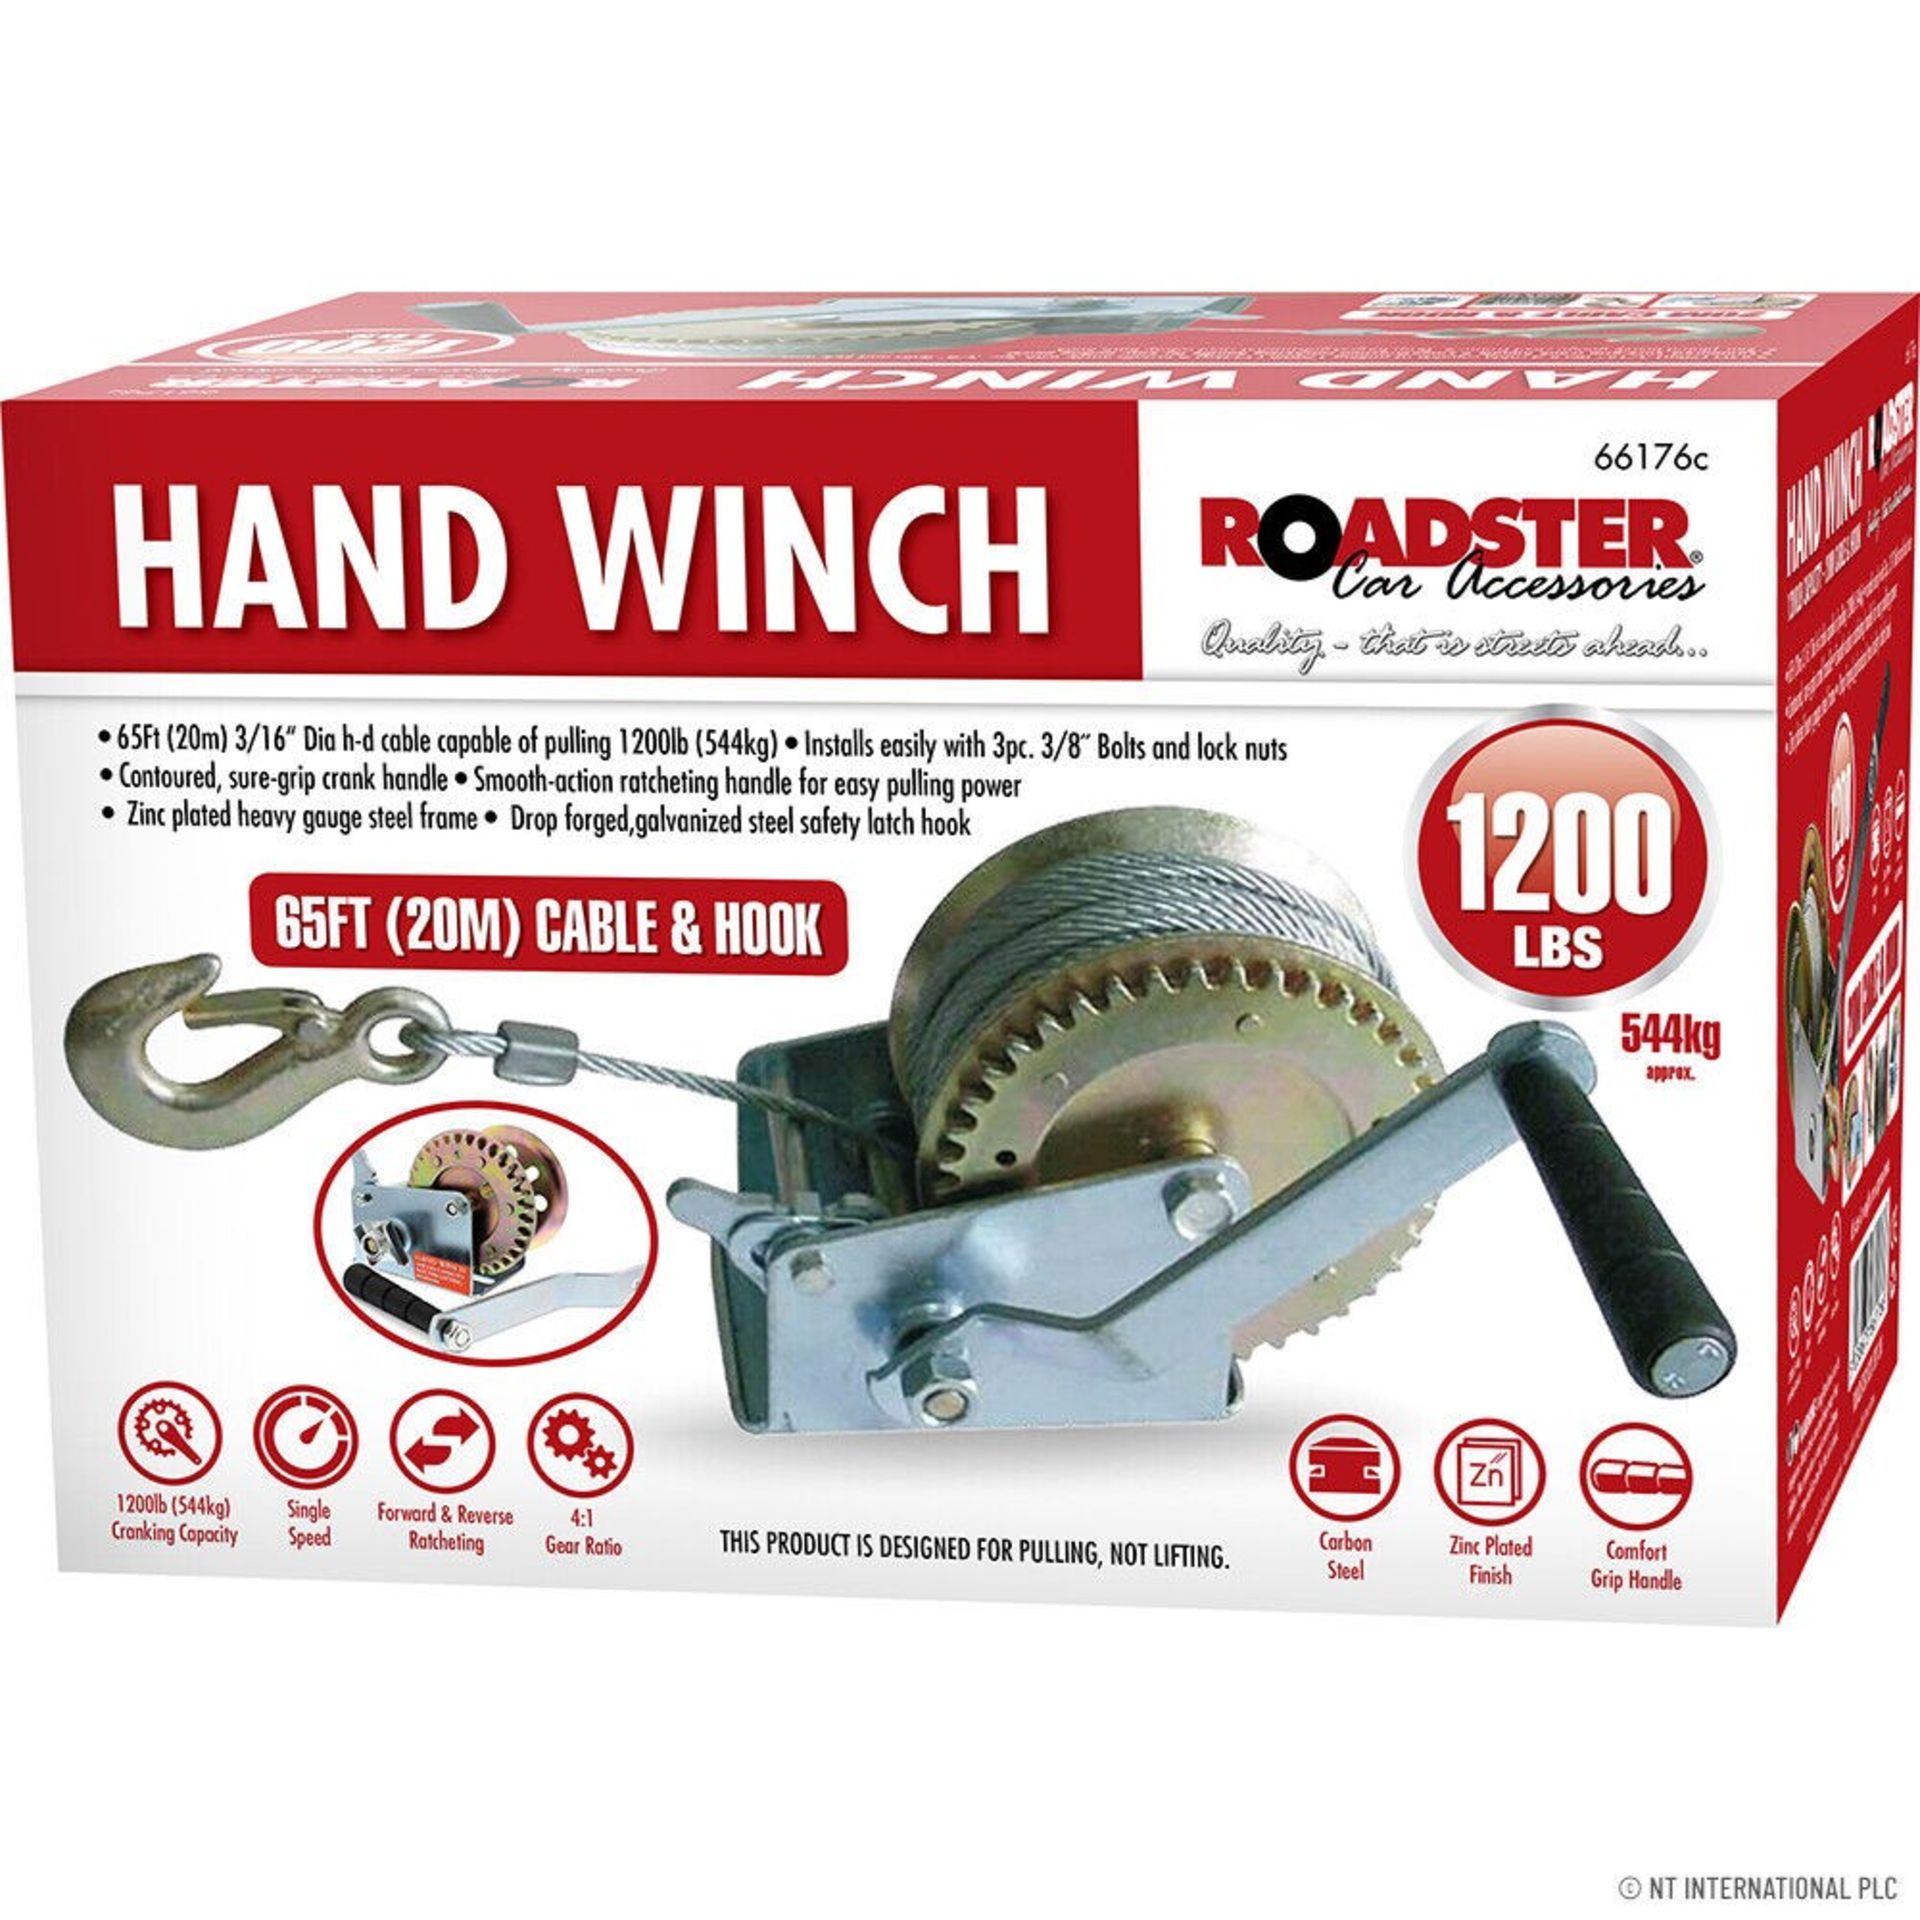 Hand Winch 65ft (20m) Cable and hook